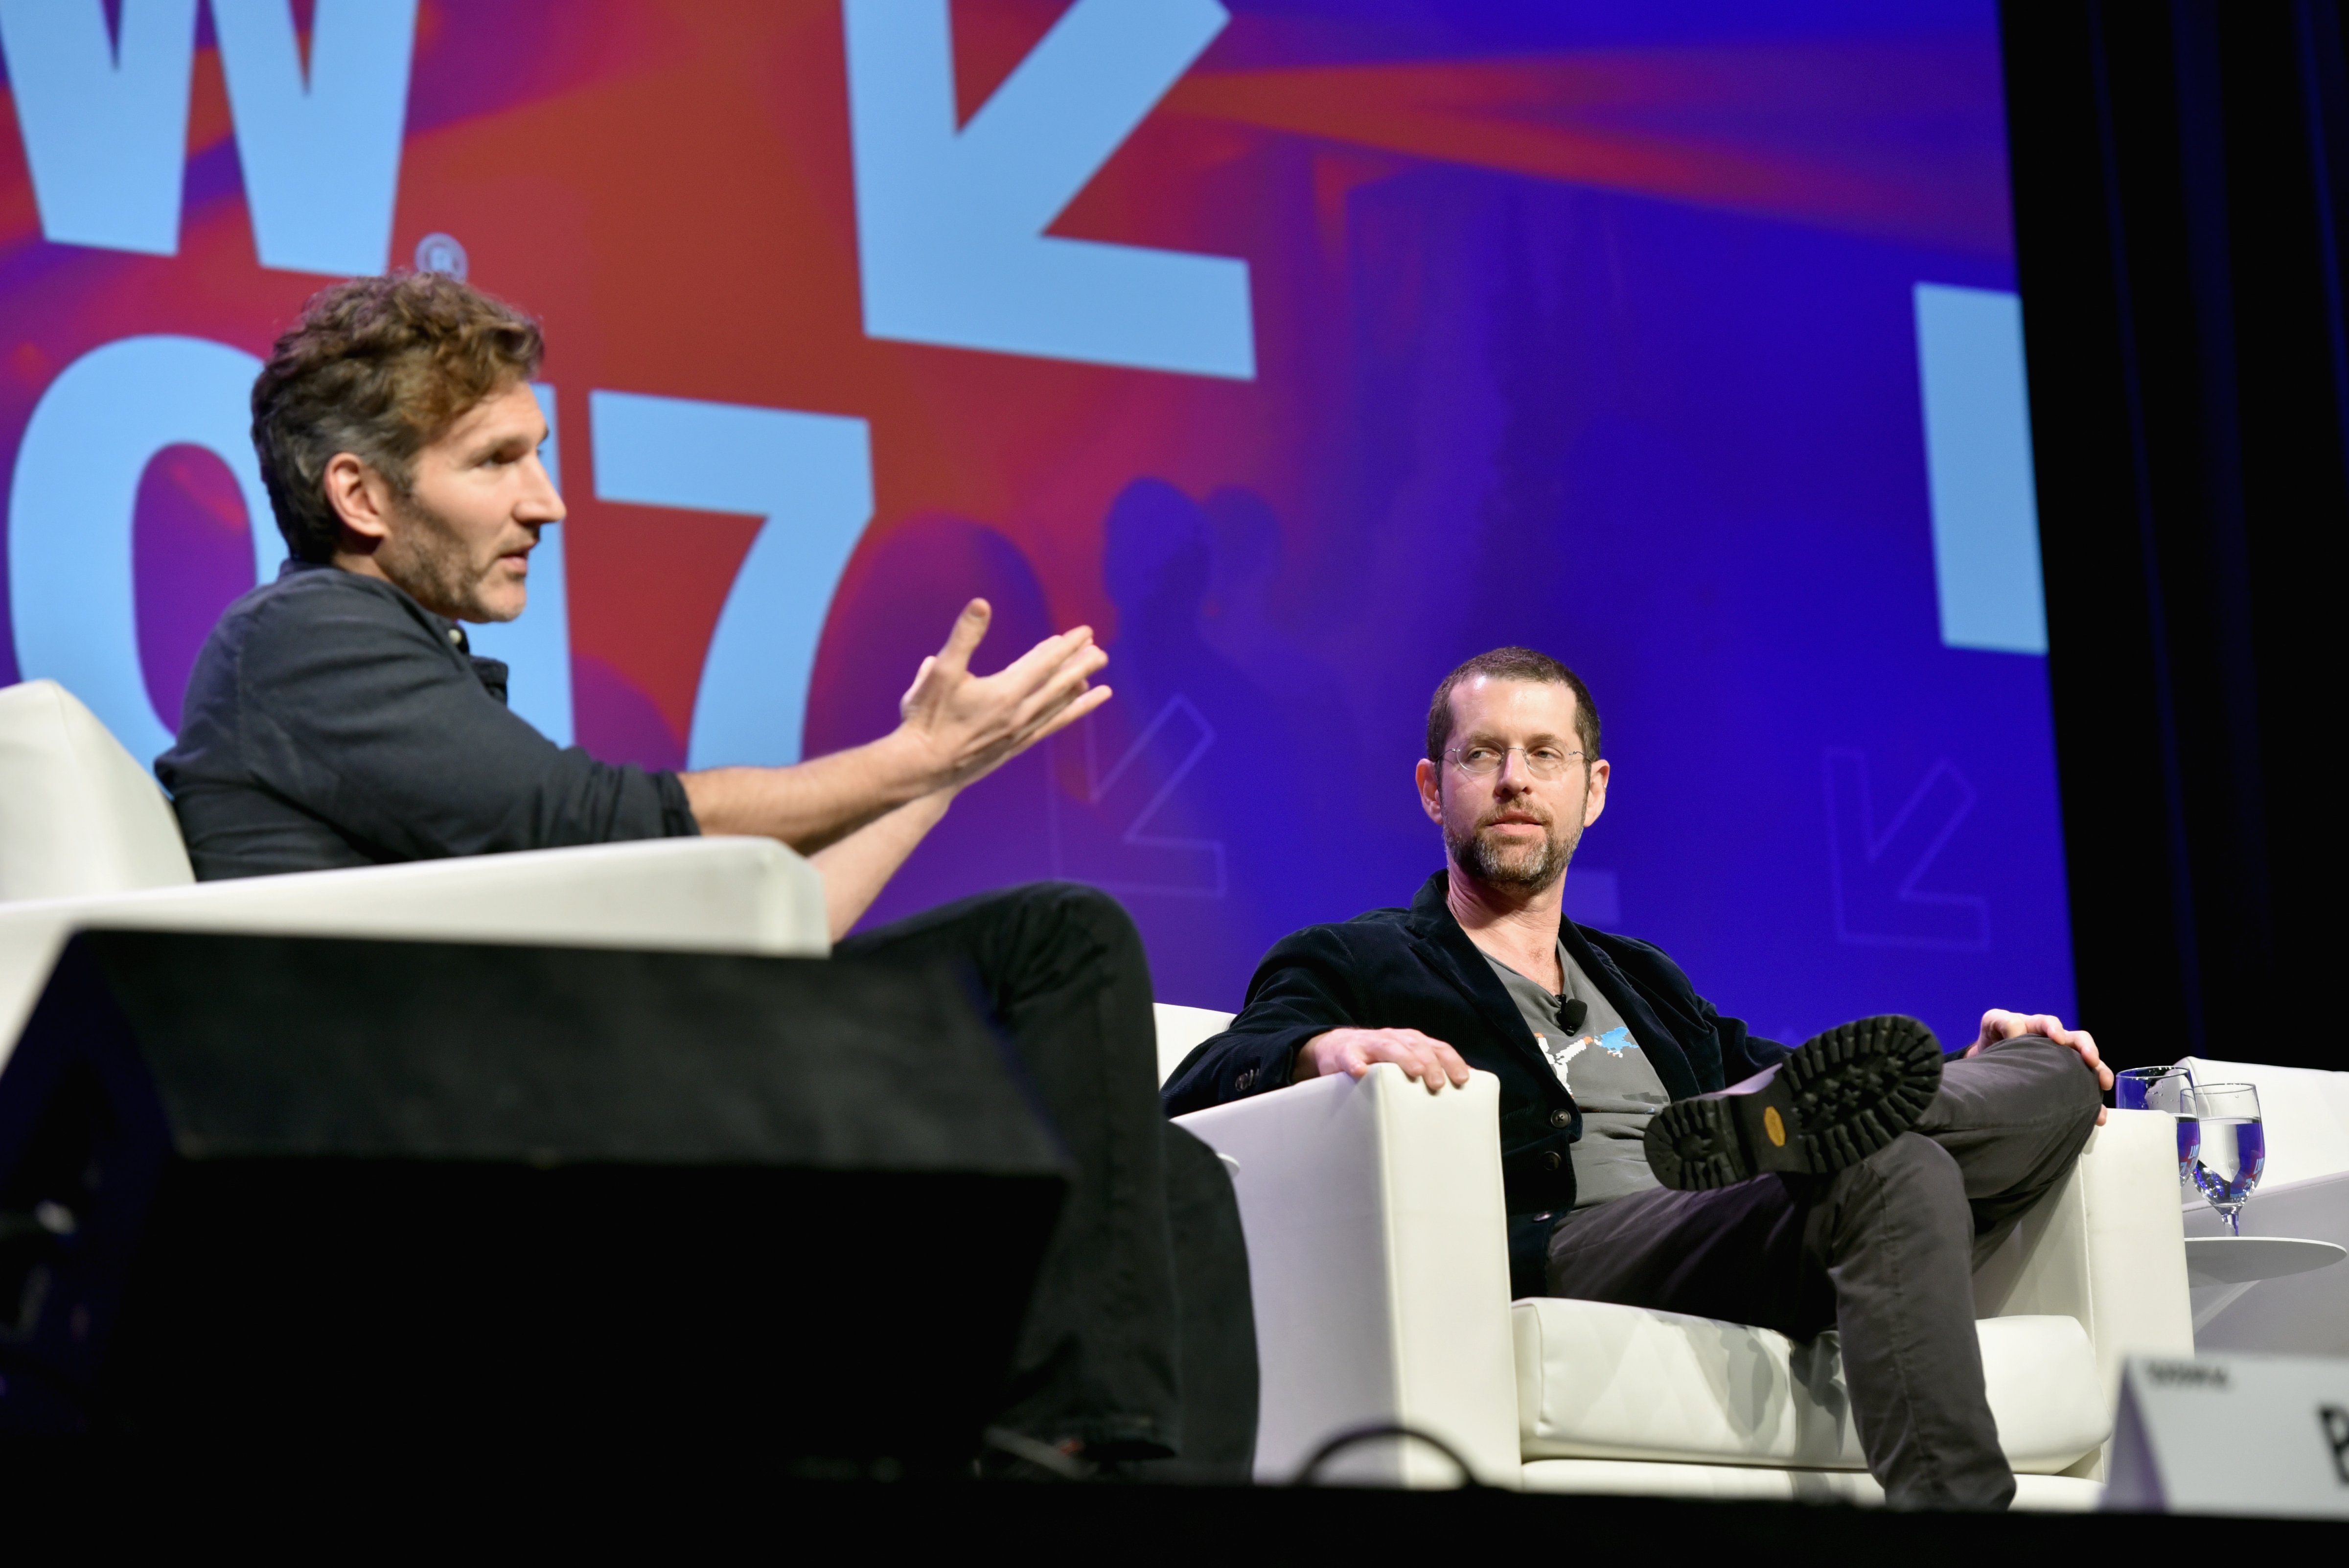 Featured Session: Game of Thrones - 2017 SXSW Conference and Festivals